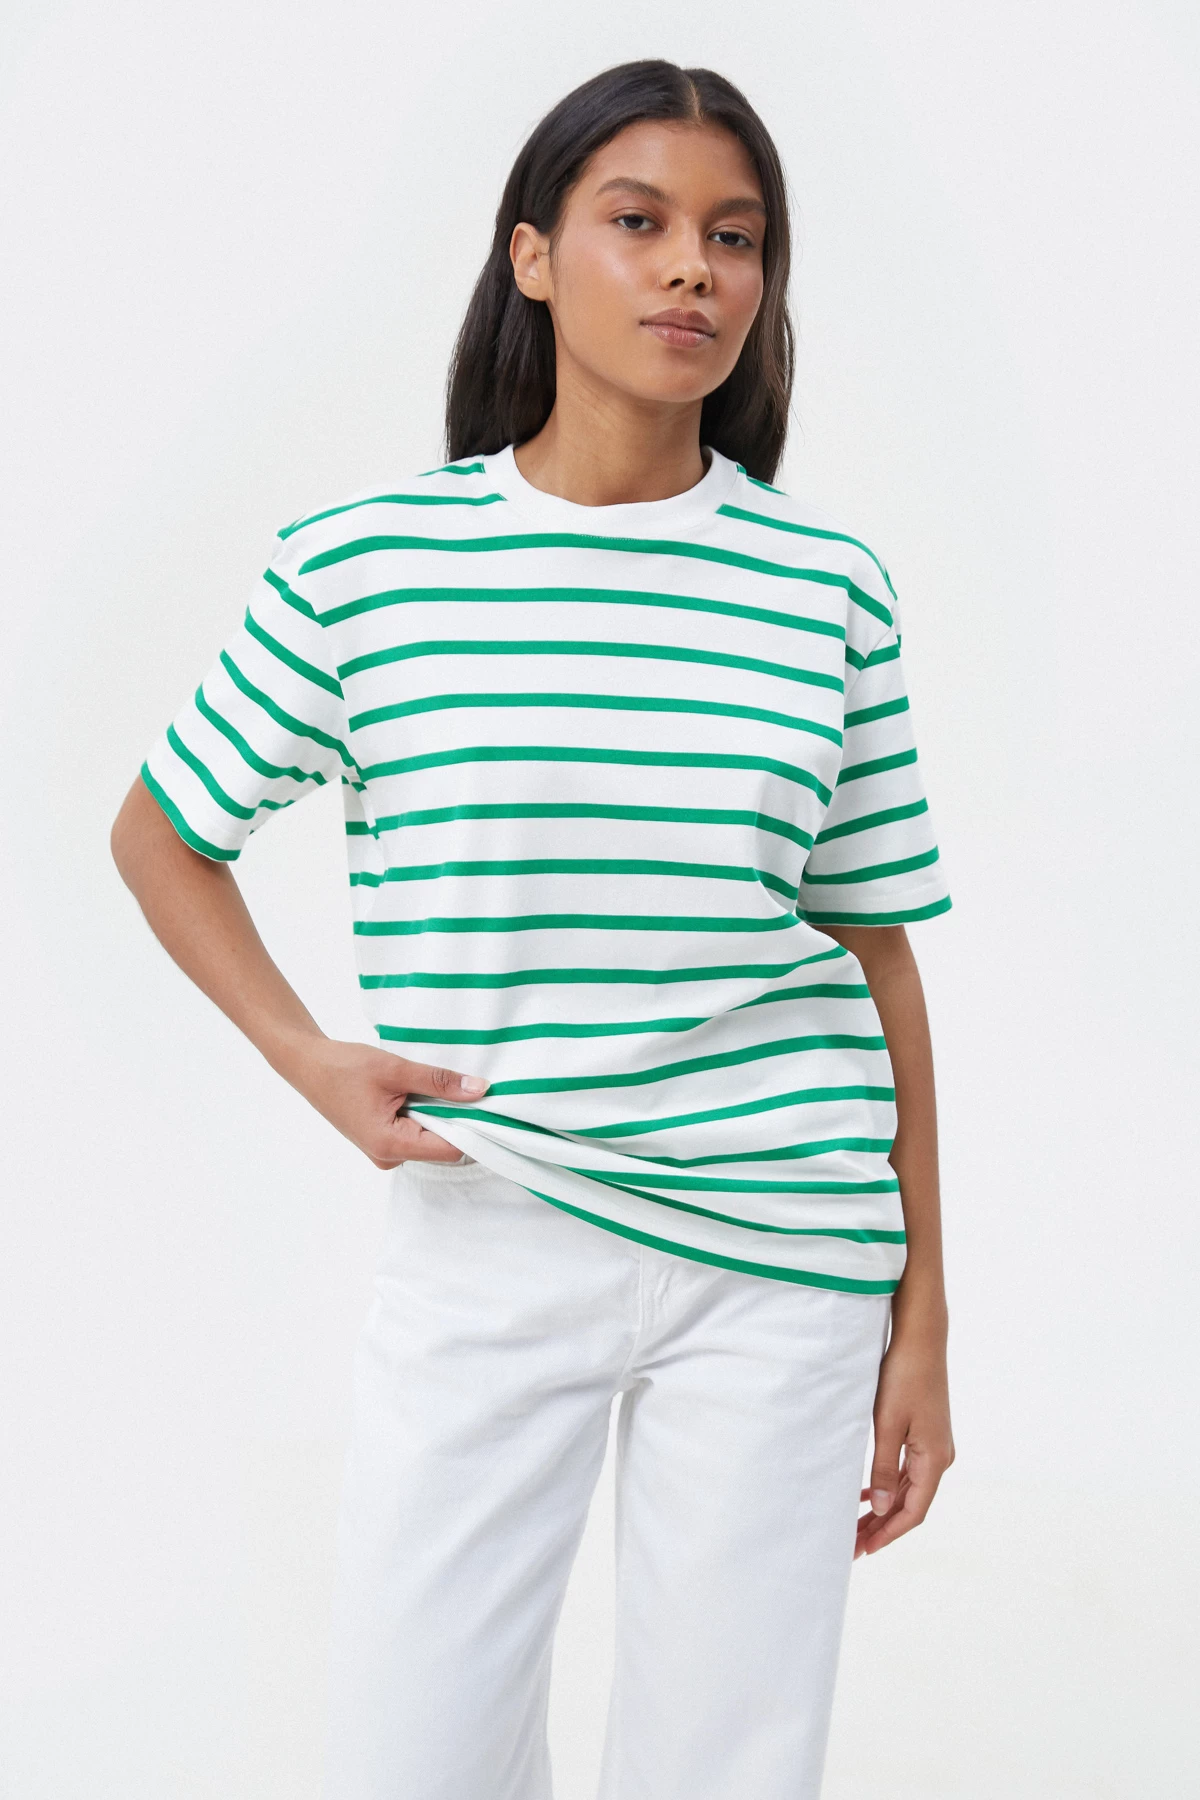 Cotton T-shirt with green stripes, photo 2